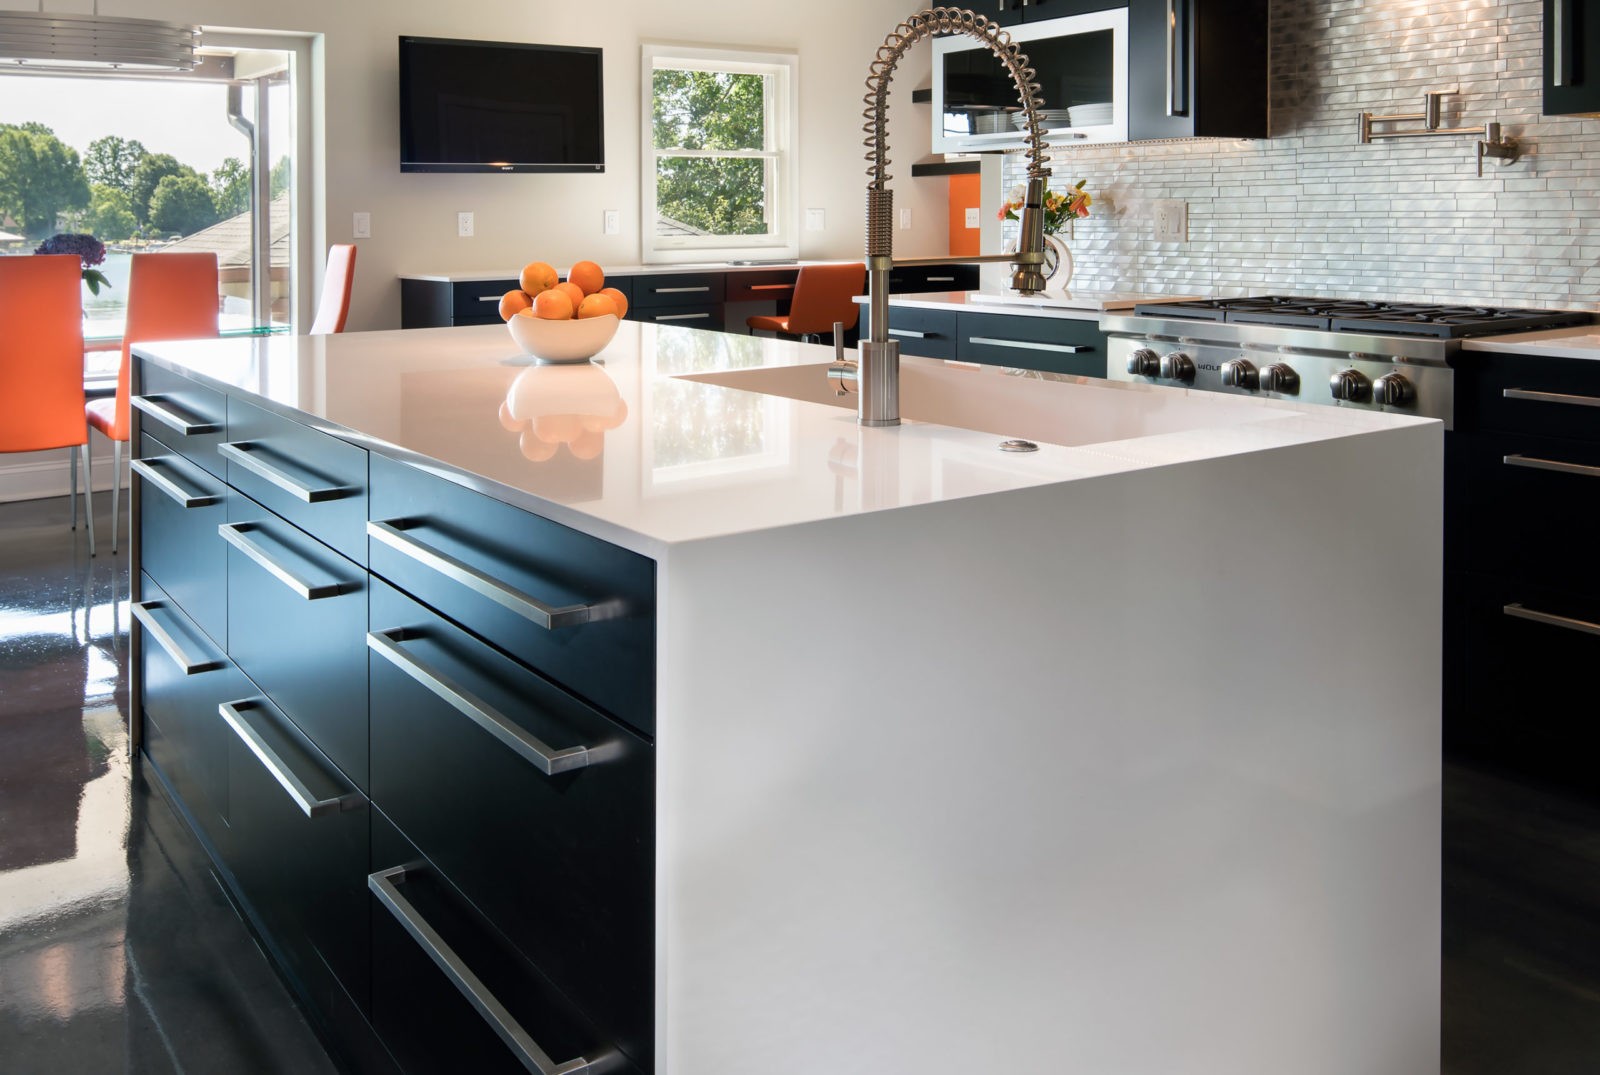 A white Silestone countertop with a waterfall edge creates a contemporary look in this Lake Norman kitchen remodel